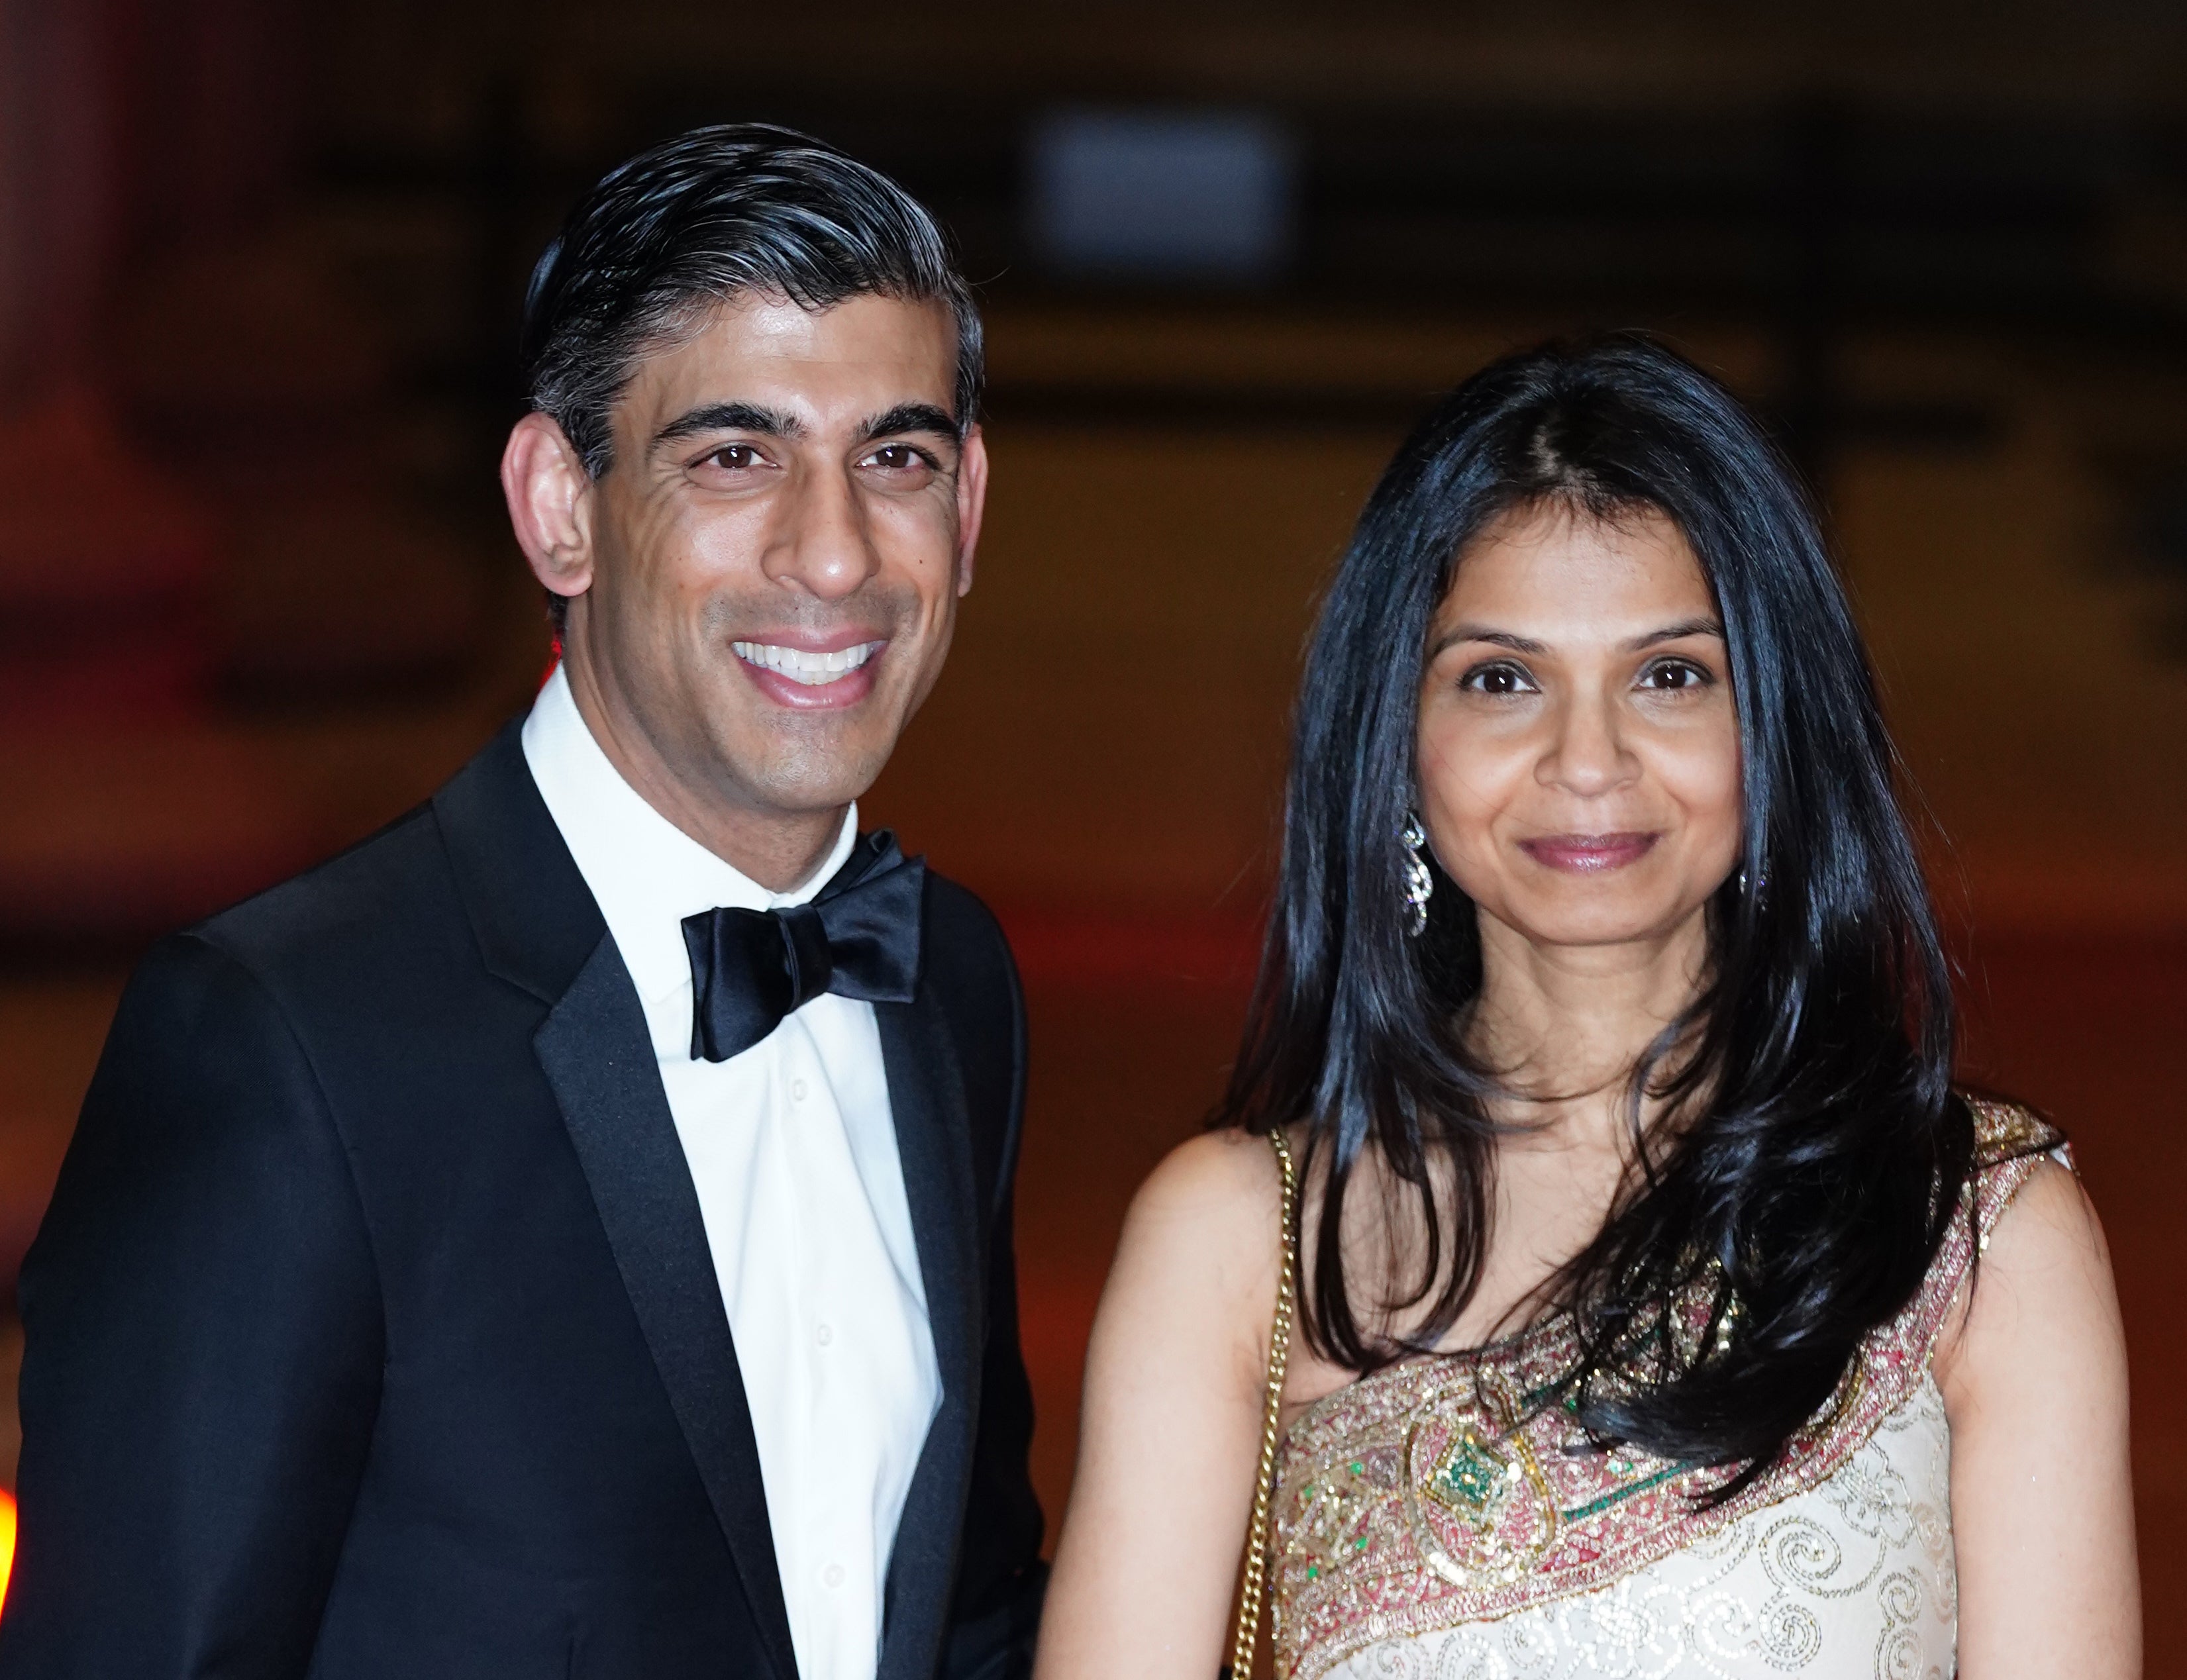 Rishi Sunak is in a ‘very, very difficult’ position in the wake of his wife’s non-domiciled status, Nicola Sturgeon said (Ian West/PA)